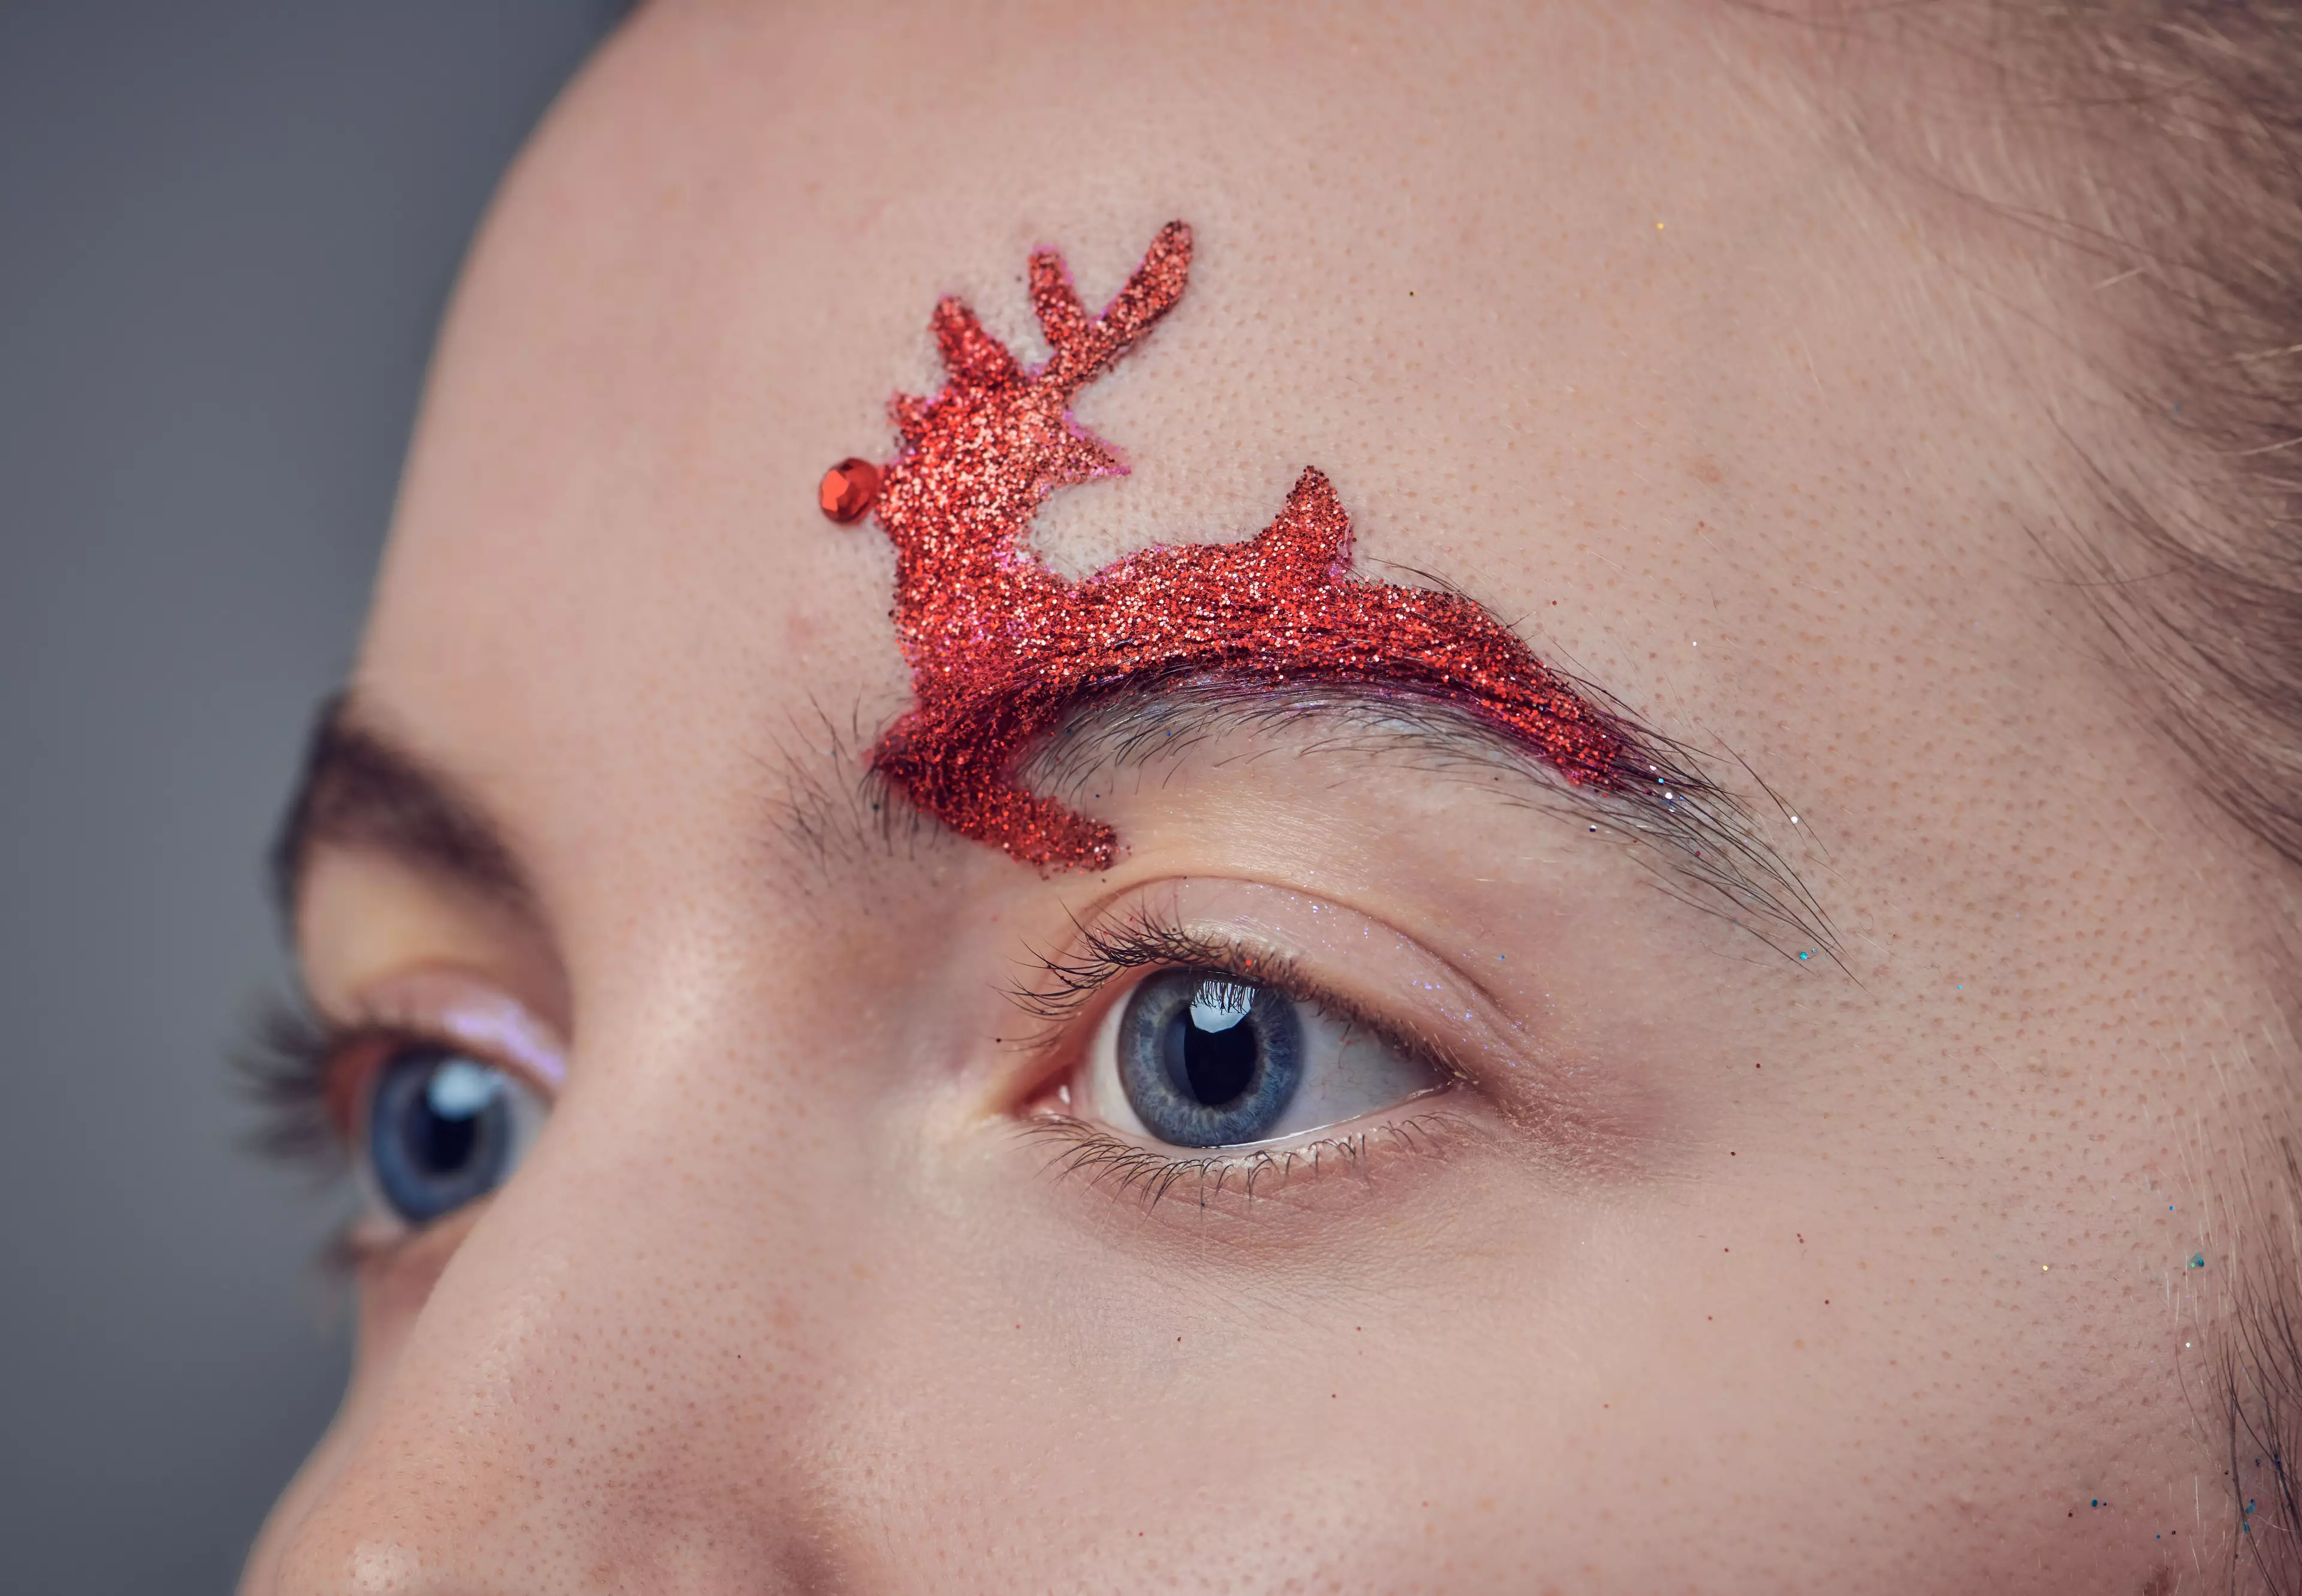 Try decking out your brows with a leaping red Rudolph designs or iridescent bow of holly (